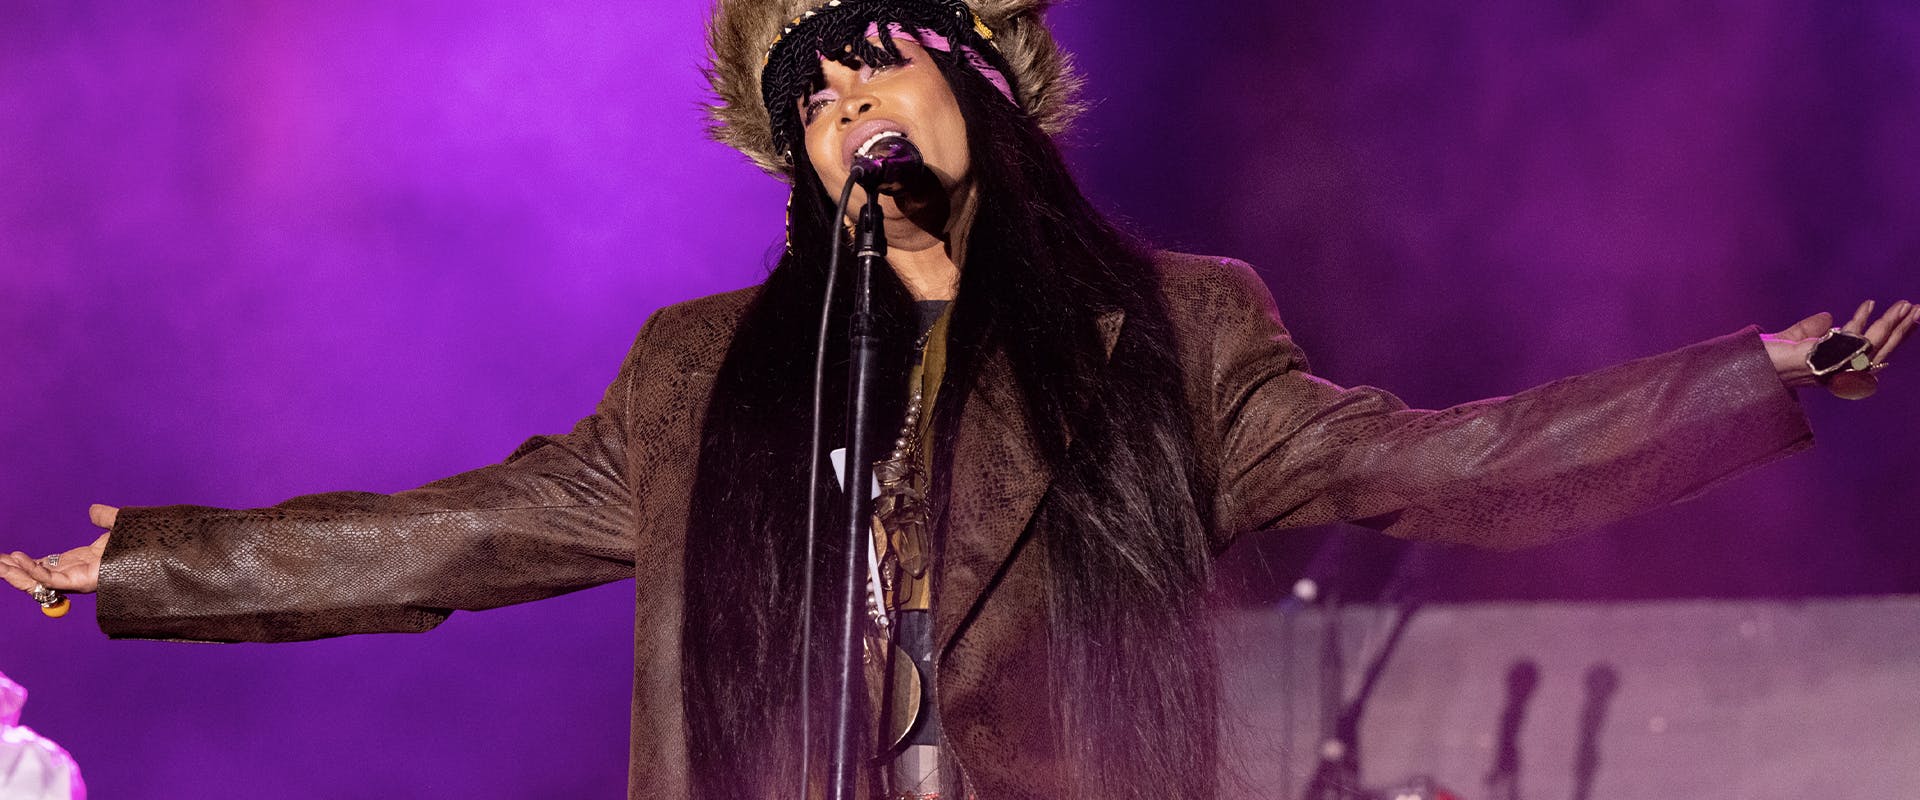 Singer Erykah Badu performs onstage during the Smokin Grooves Festival at Los Angeles State Historic Park on March 19, 2022 in Los Angeles, California. (Photo by Scott Dudelson/Getty Images)